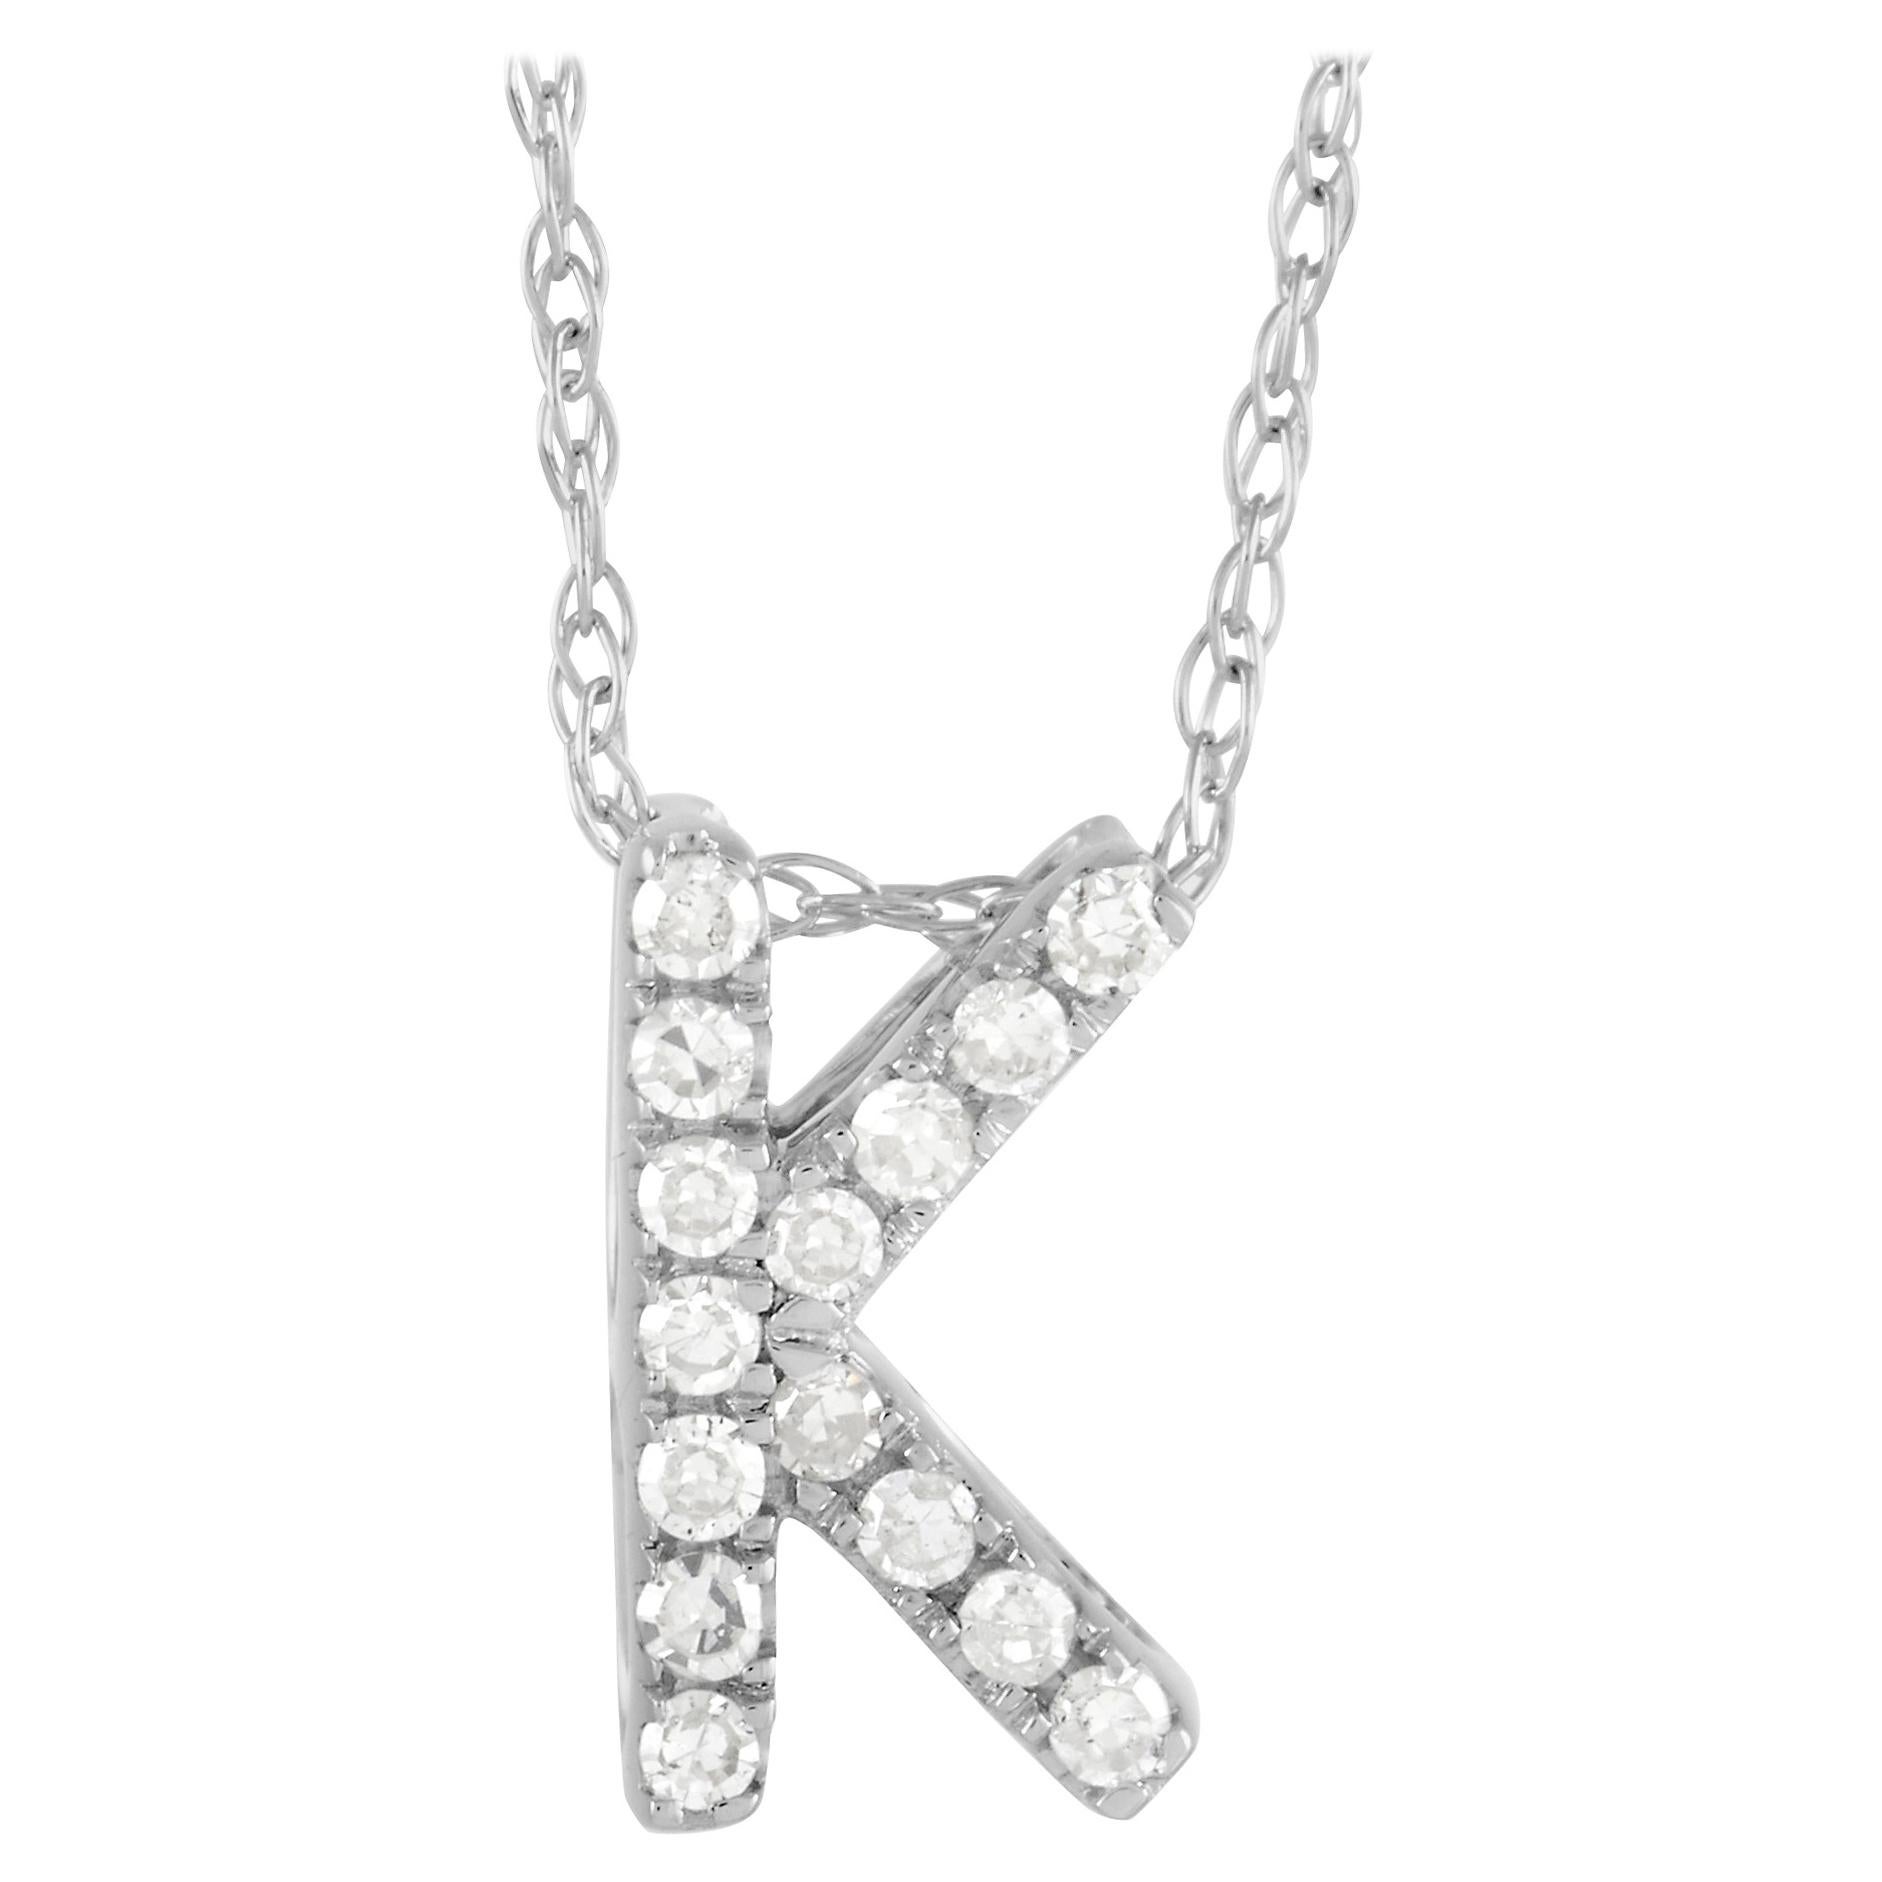 LB Exclusive 14k White Gold 0.10ct Diamond Initial 'K' Necklace